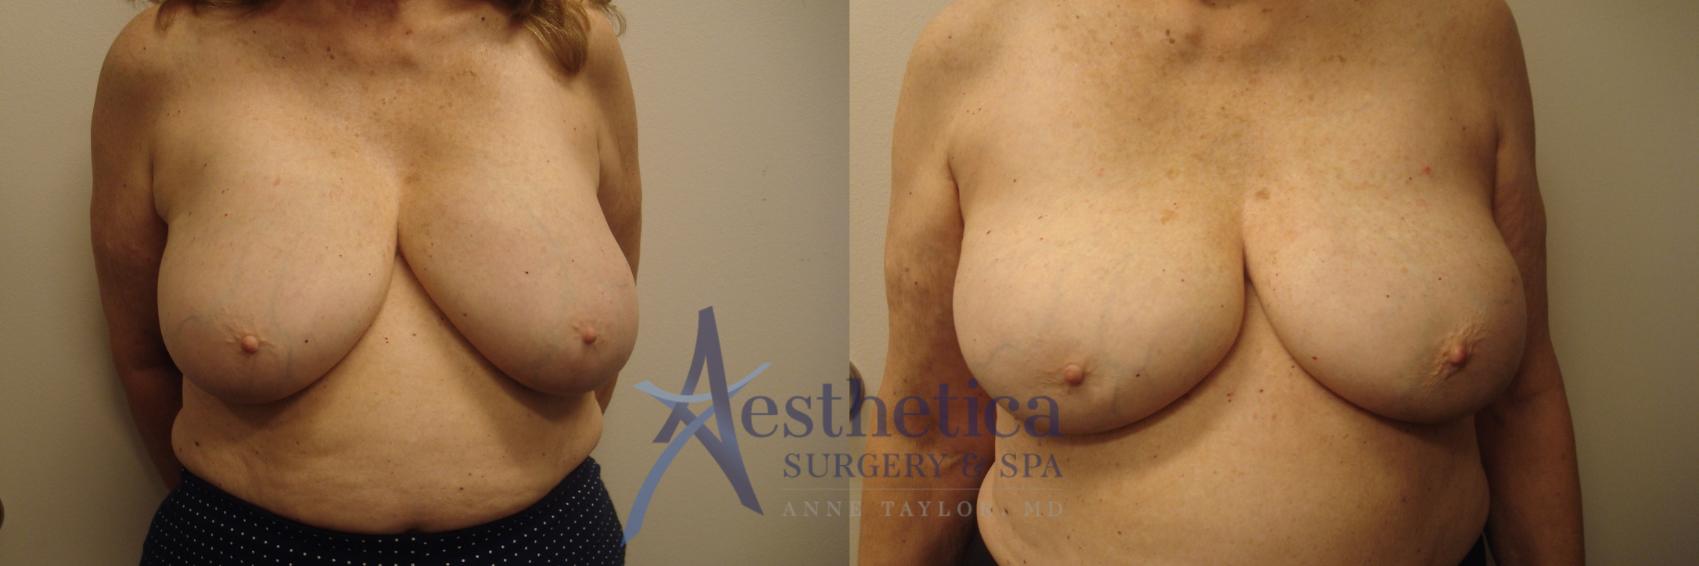 Breast Implant Removal  Case 542 Before & After Front | Worthington, OH | Aesthetica Surgery & Spa